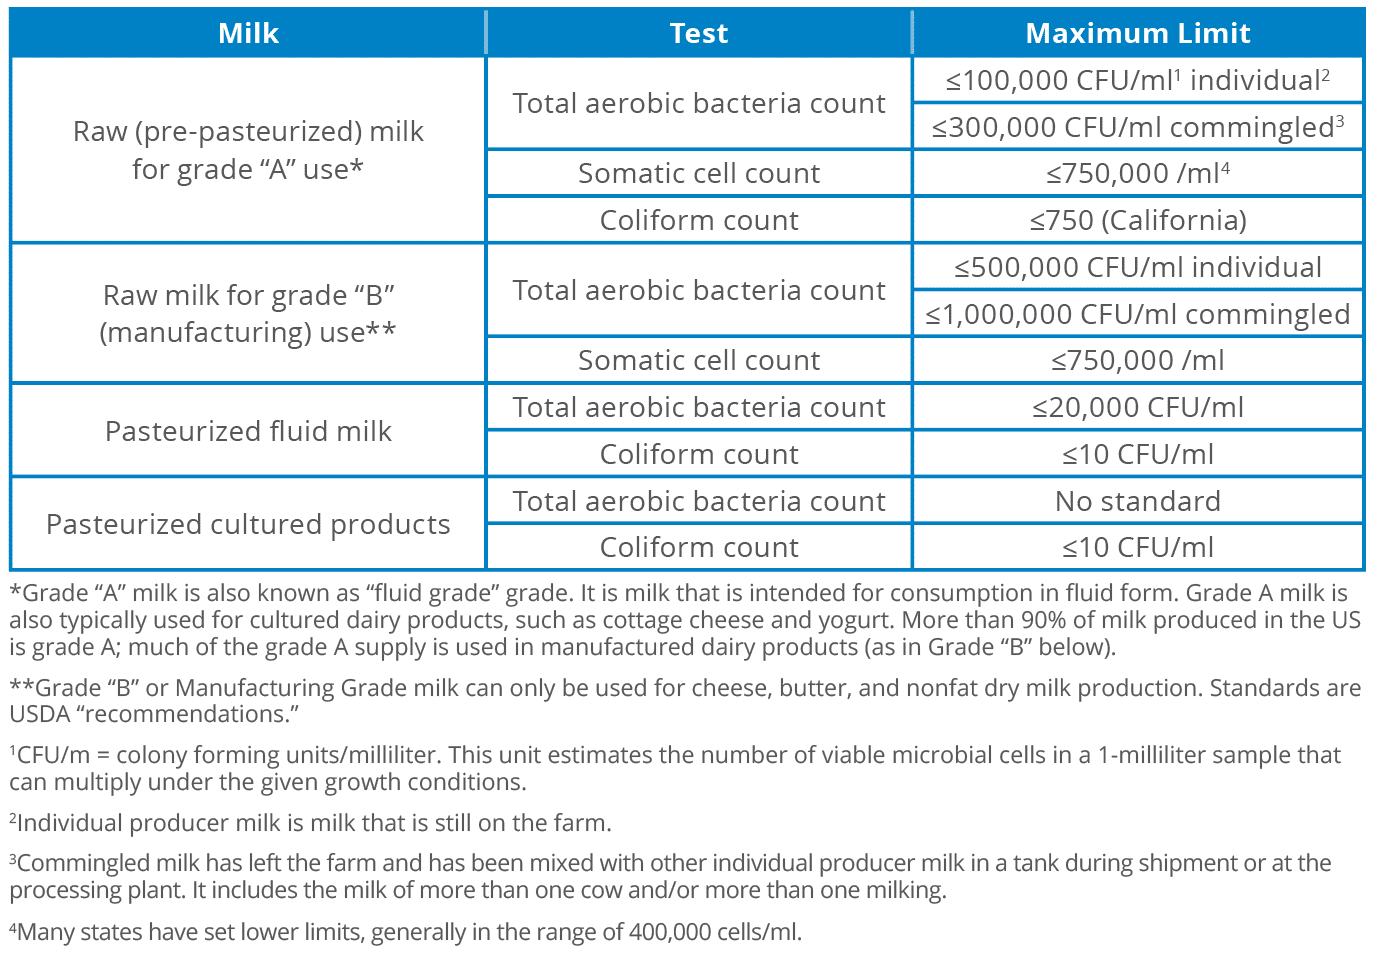 Microbiological Quality Standards for Raw and Pasteurized Milk Chart